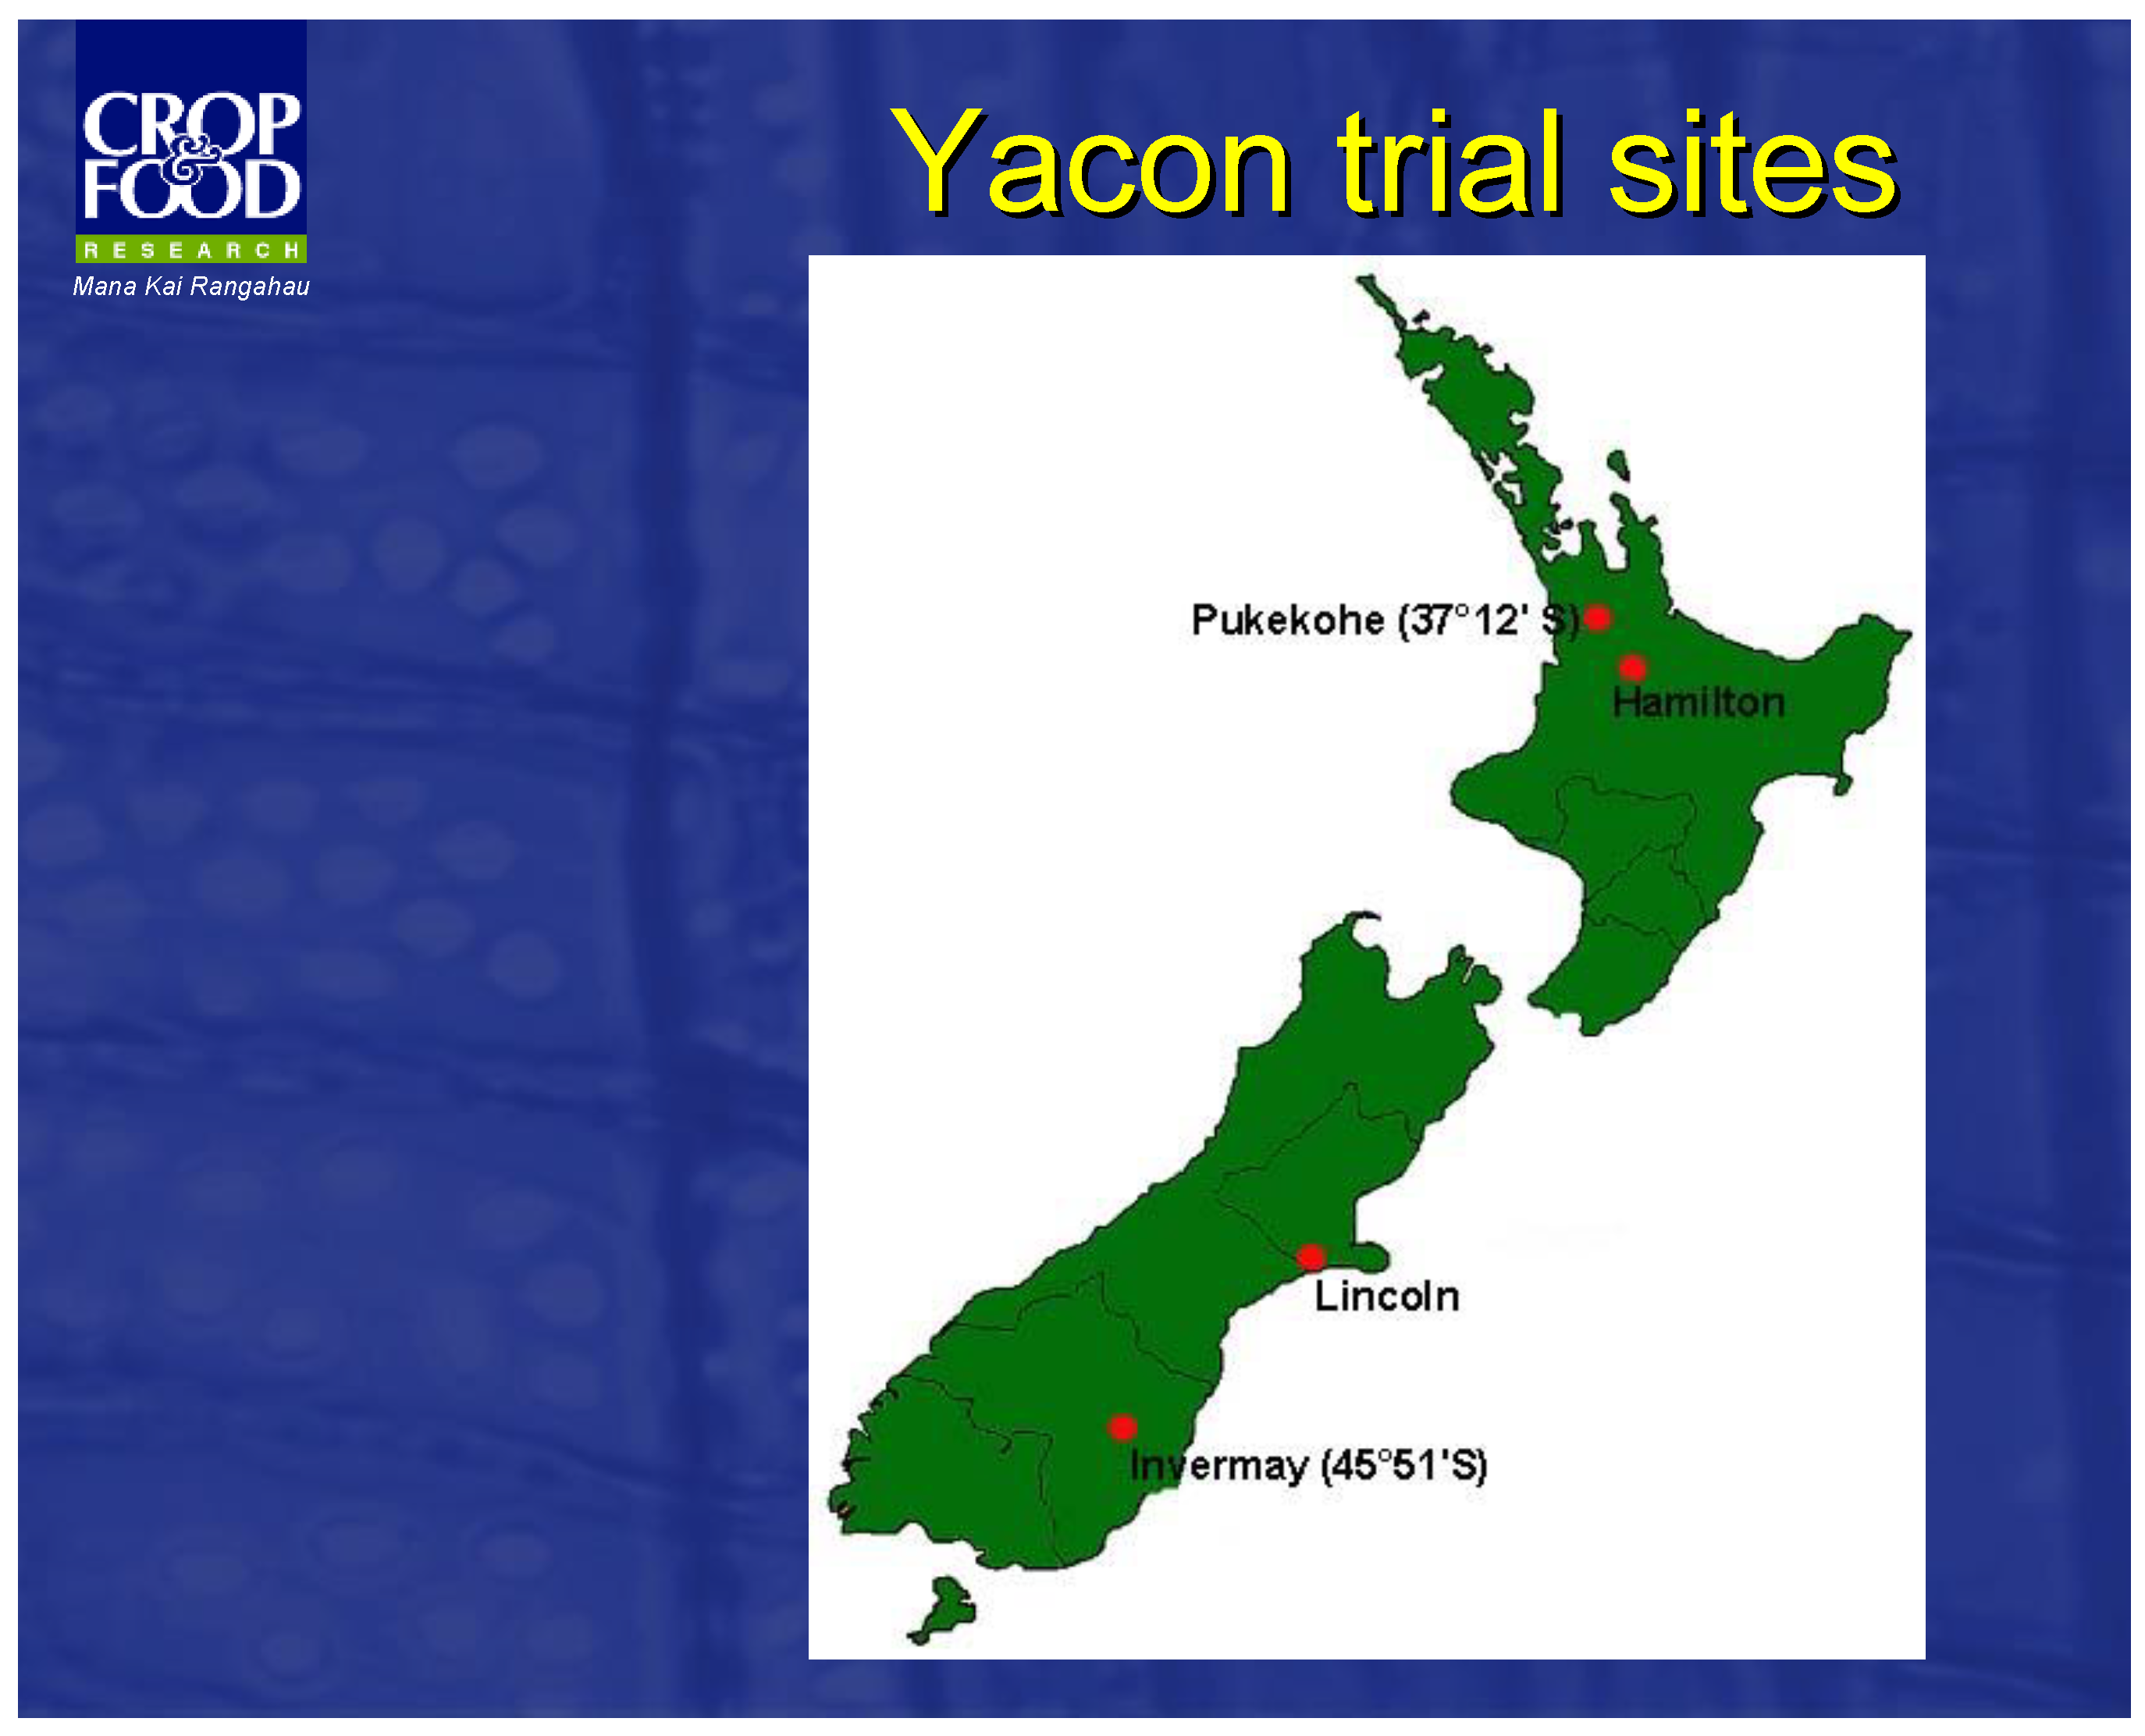 Plant & Food Research Yacon trial sites in New Zealand